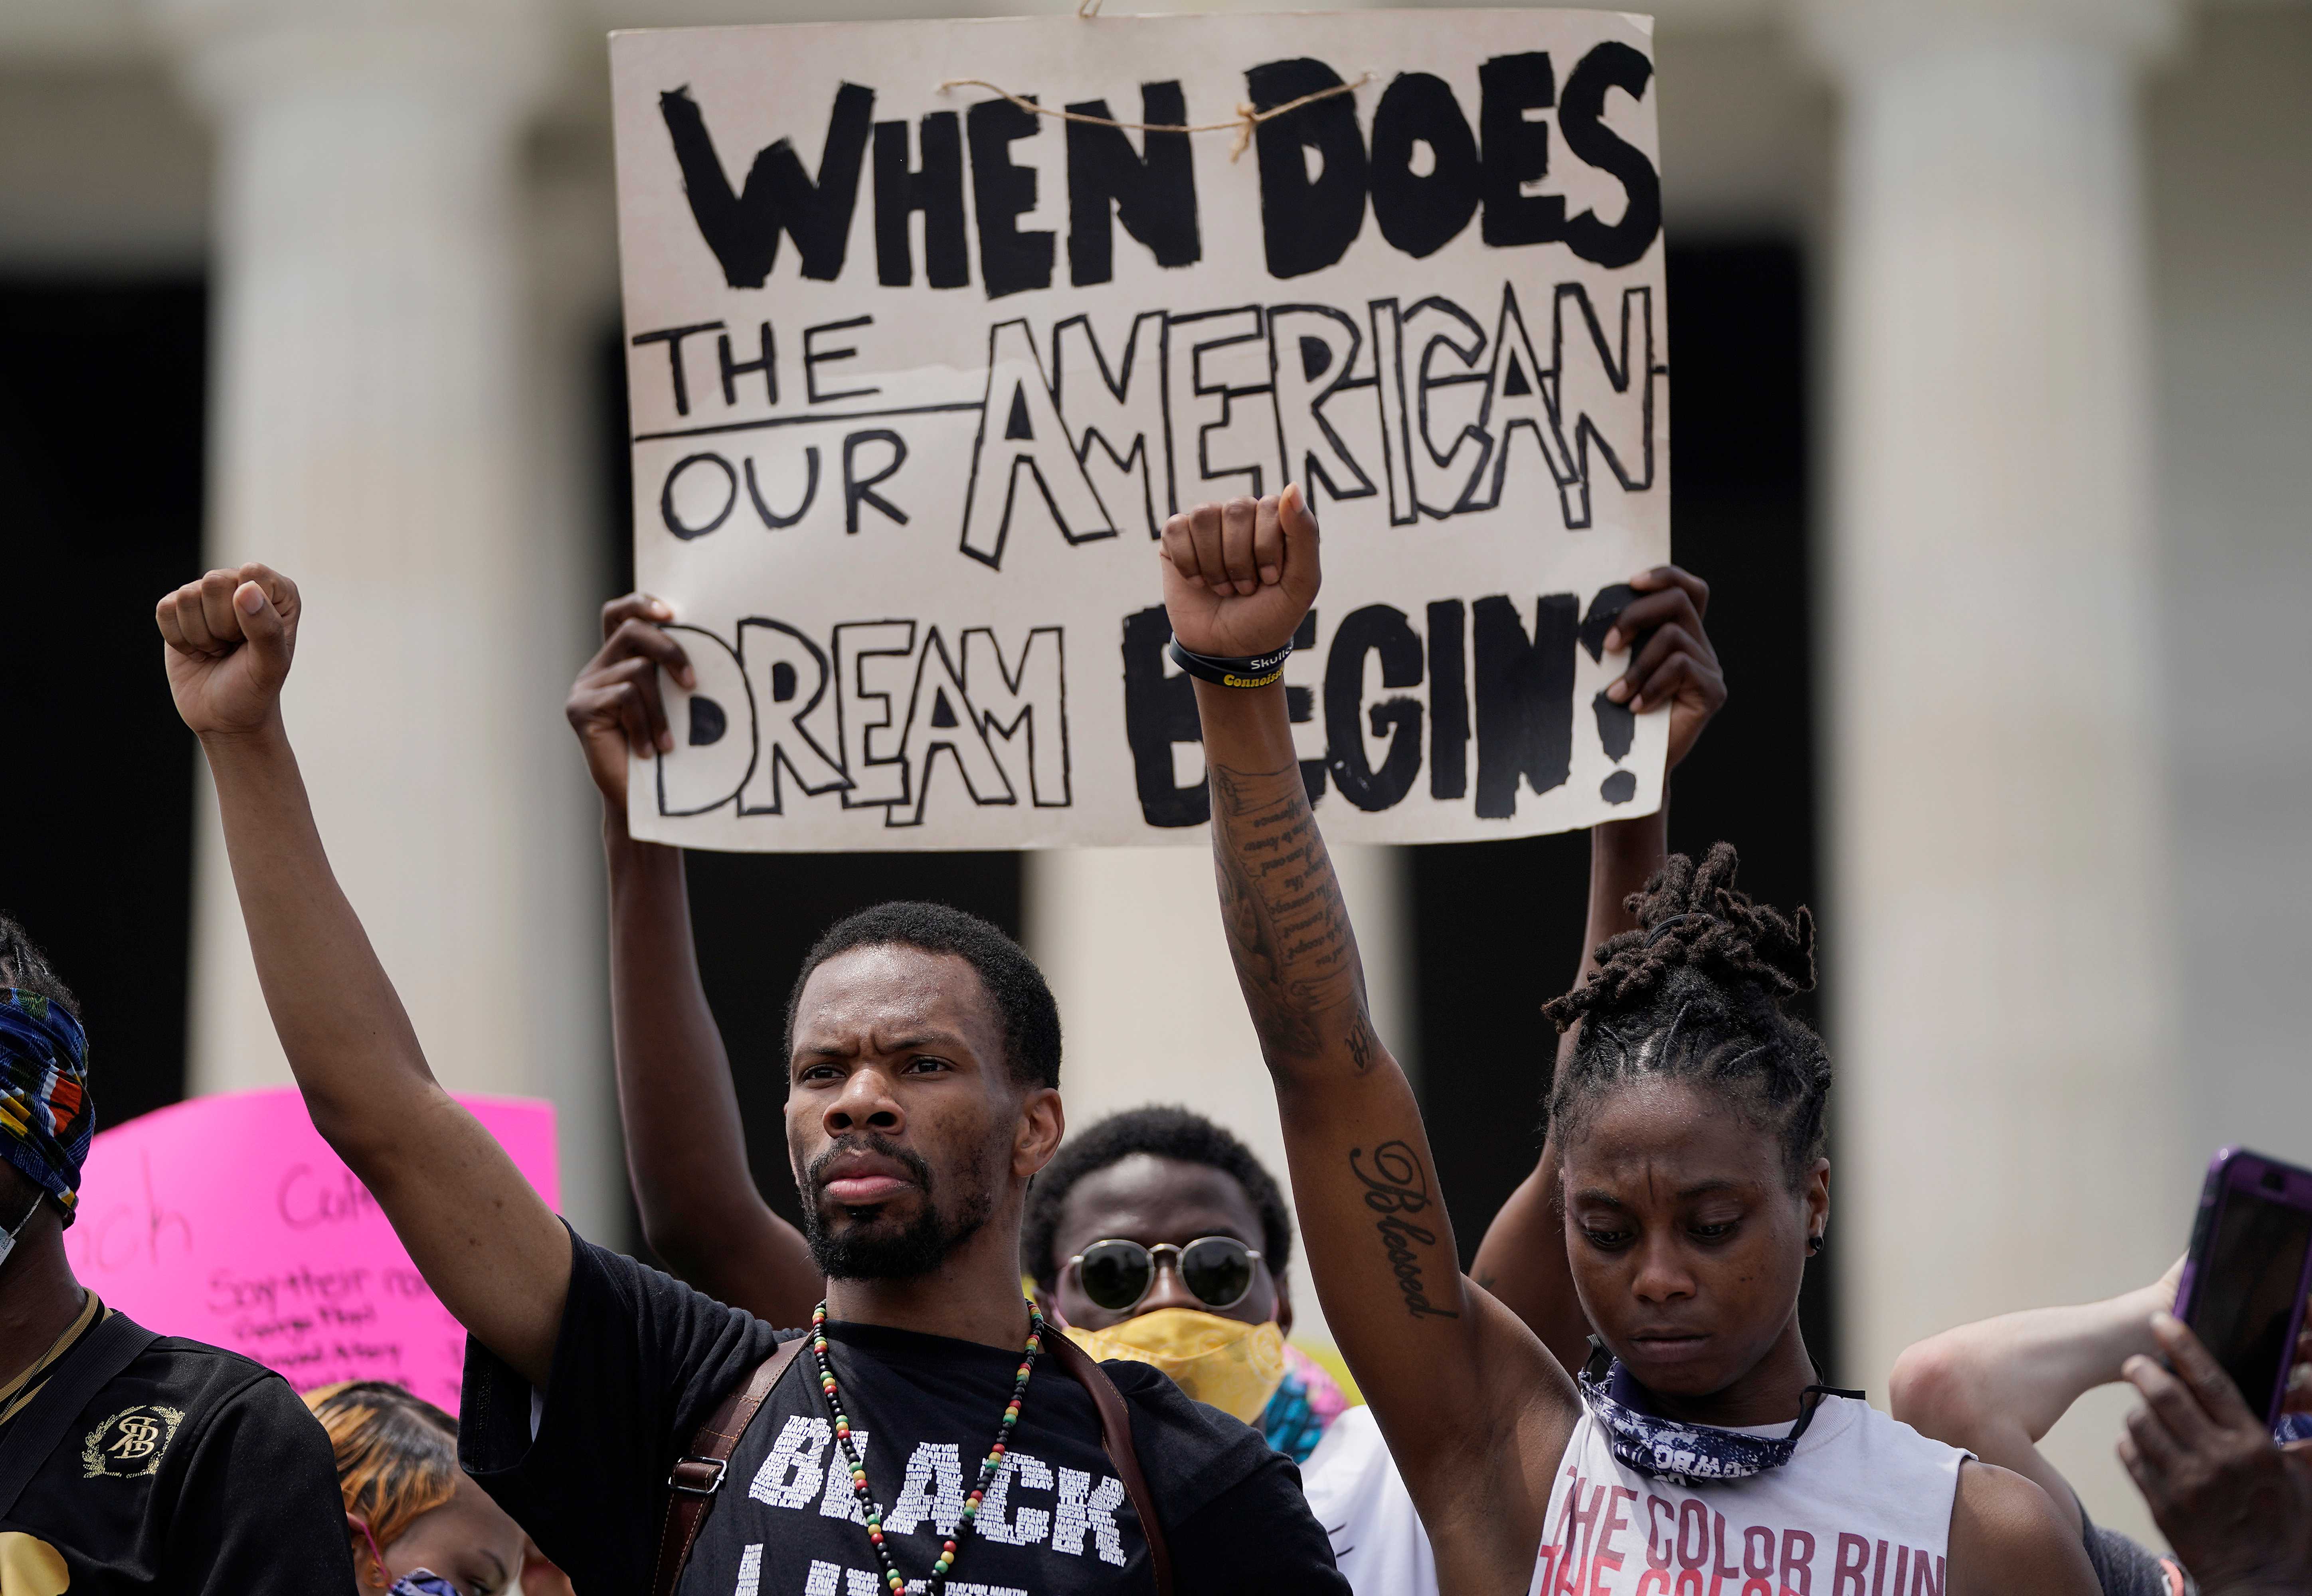 Color photograph of protesters with fists raised with sign reading "When Does The/Our American Dream Begin?"